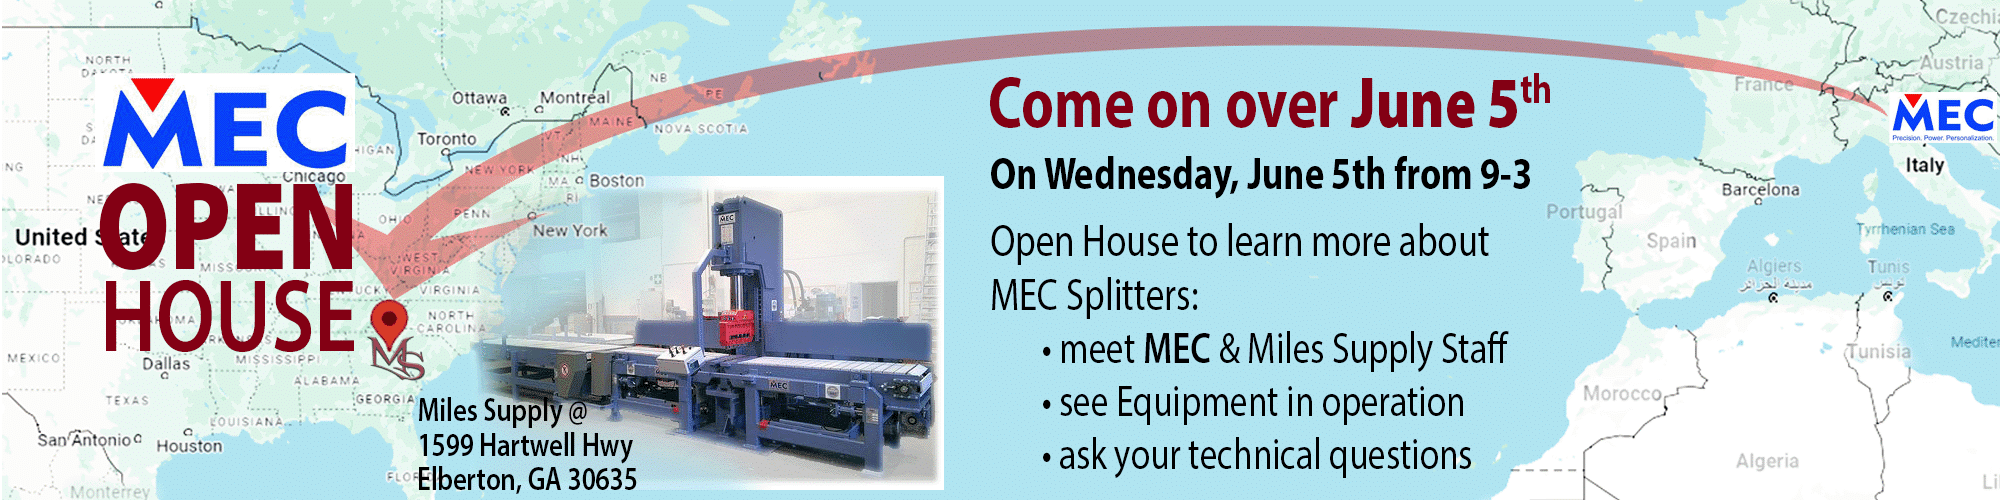 MEC stone splitters from Italy are coming to USA - visit them in Miles Supply Elberton GA